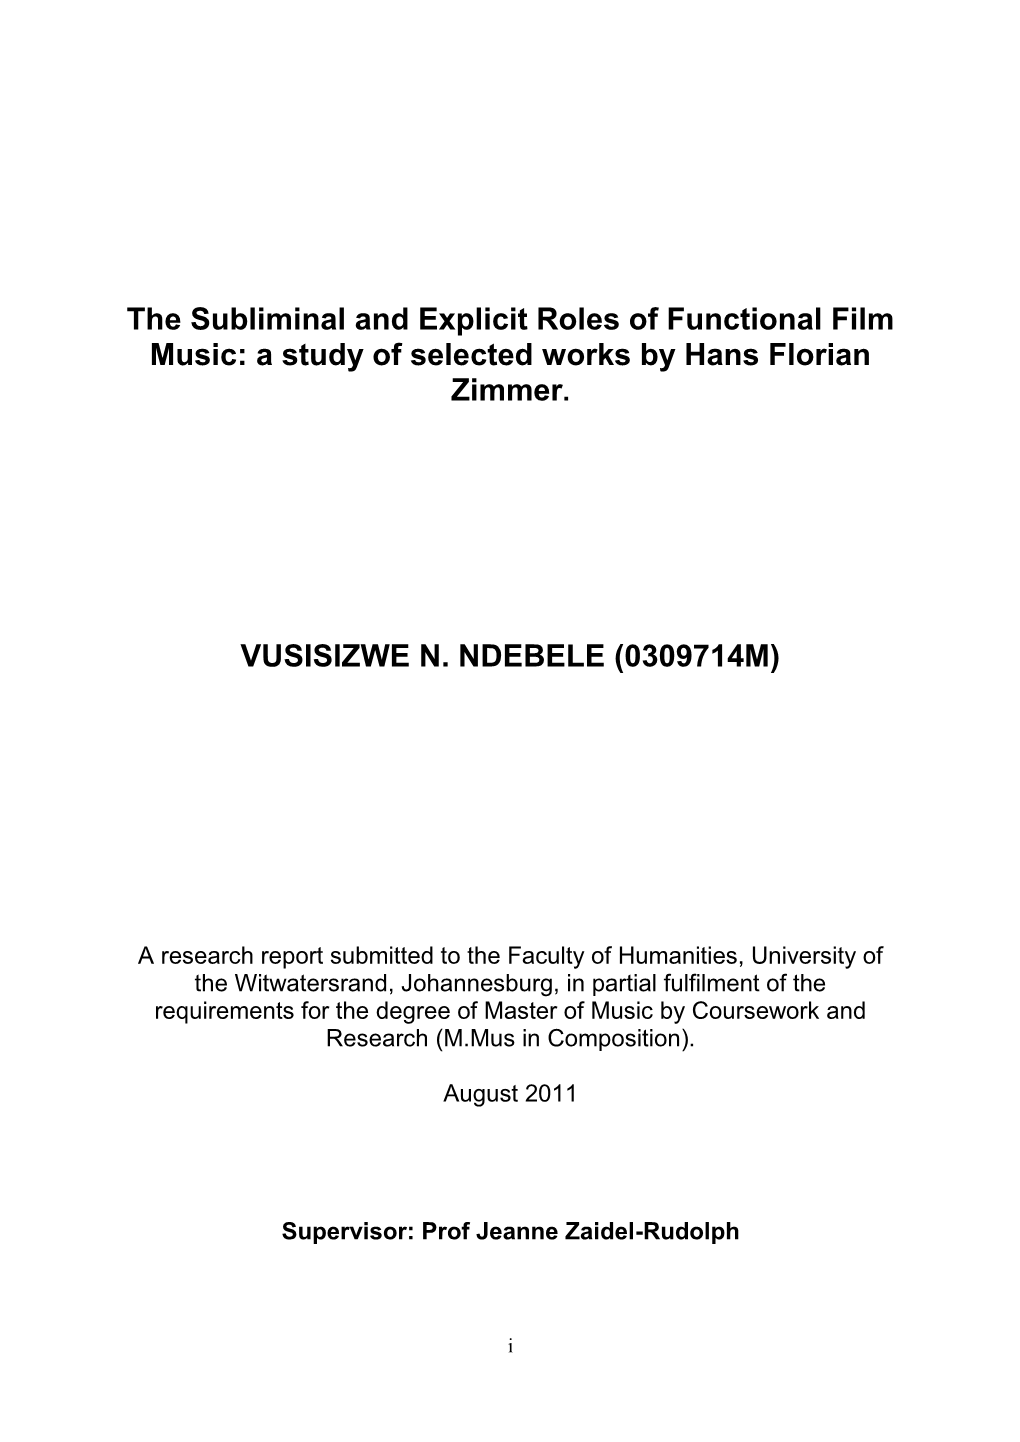 The Subliminal and Explicit Roles of Functional Film Music: a Study of Selected Works by Hans Florian Zimmer